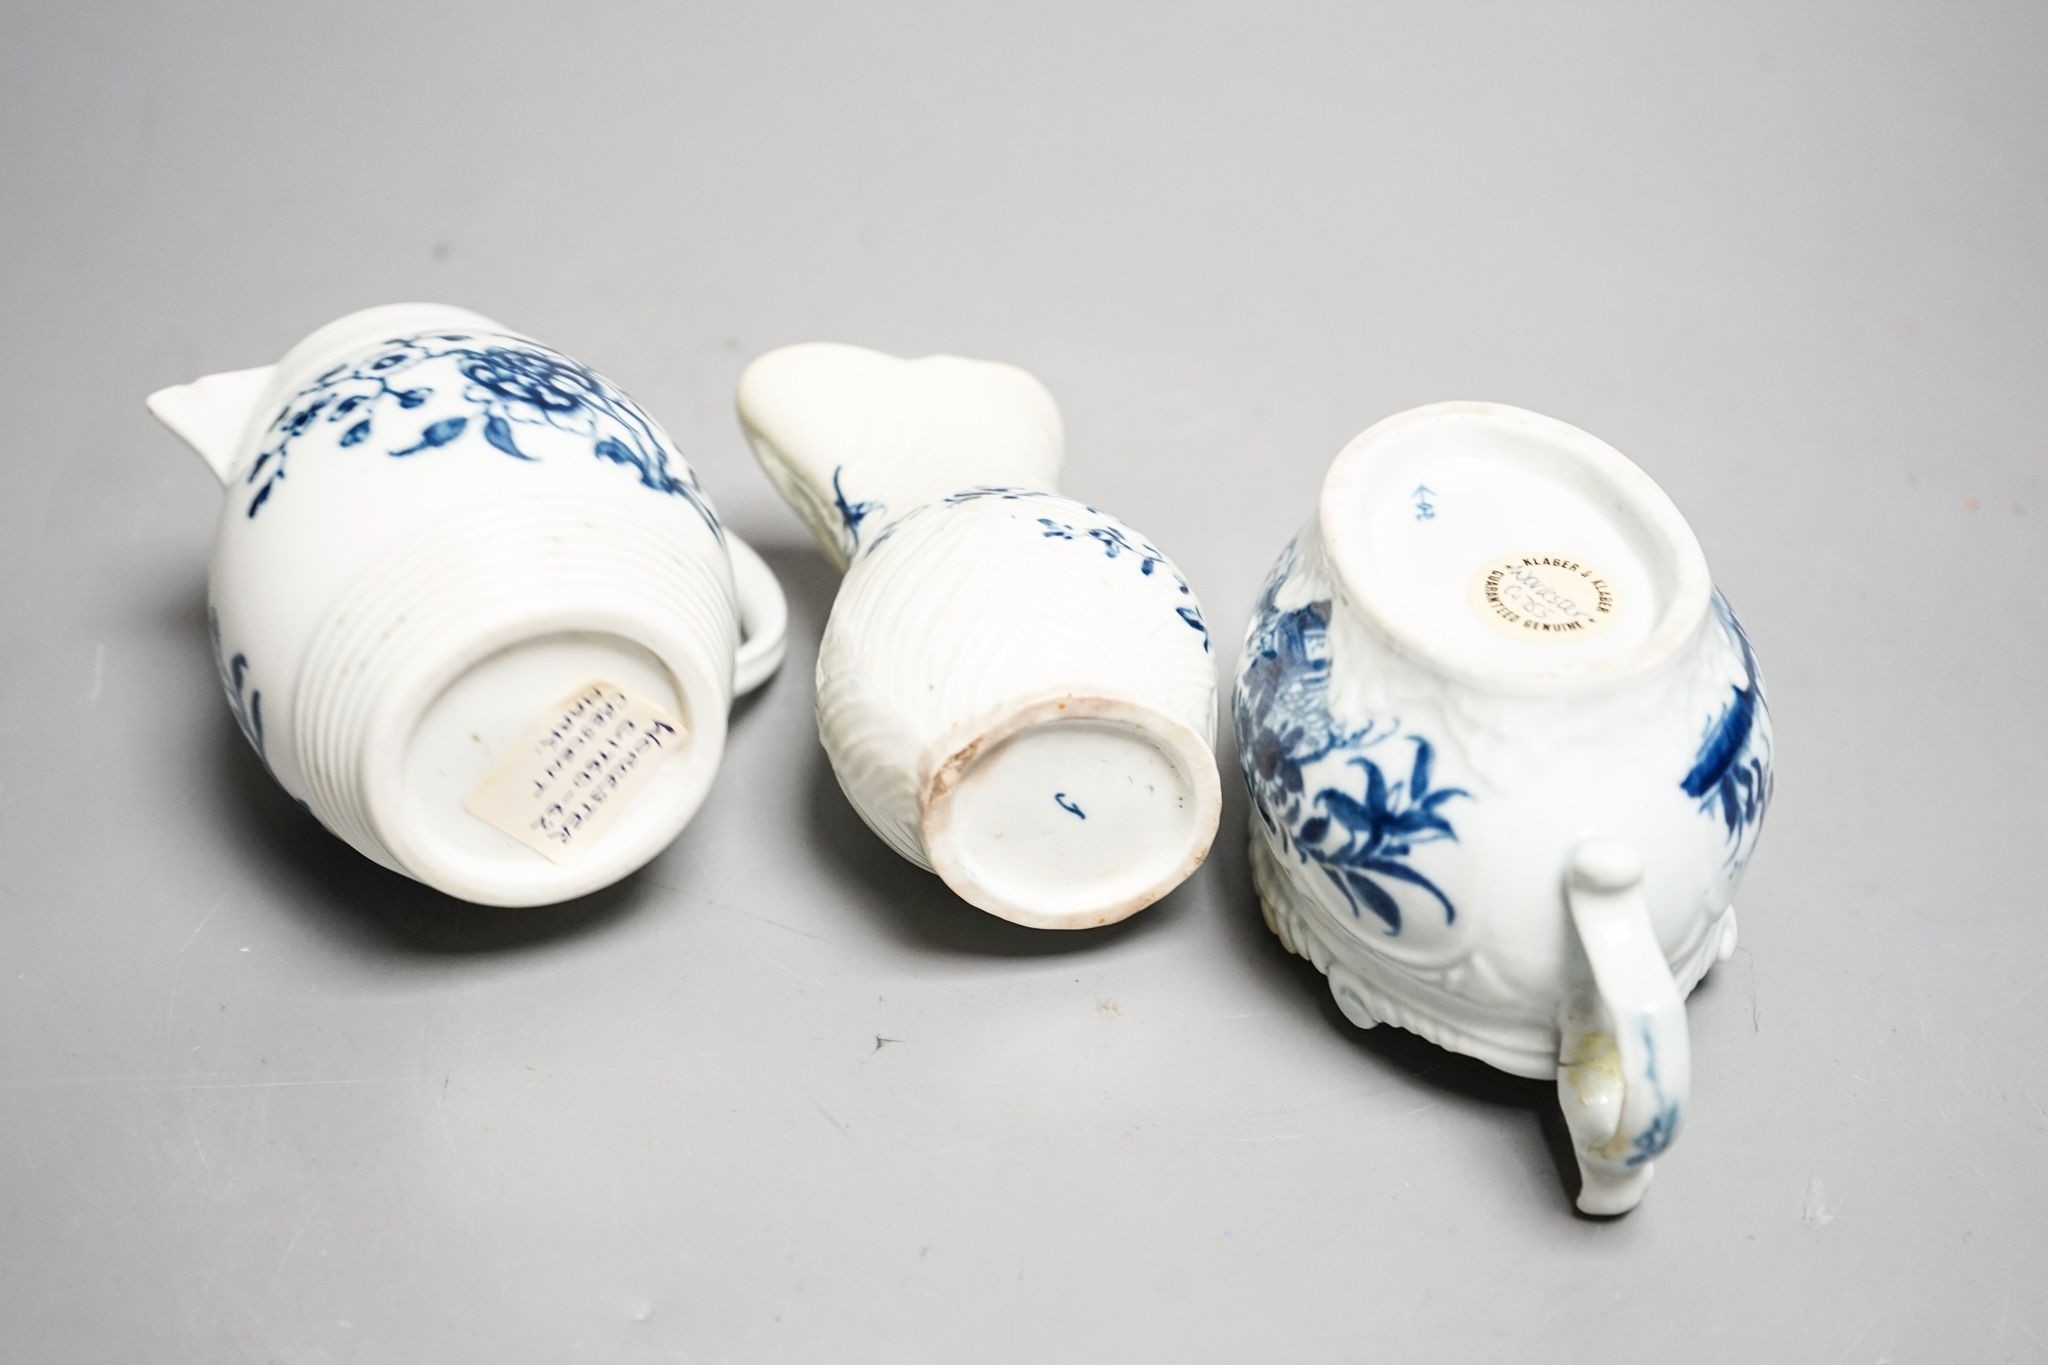 A Worcester blue and white sauceboat, sparrow beak milk jug and a Mansfield pattern milk jug, tallest 9 cm